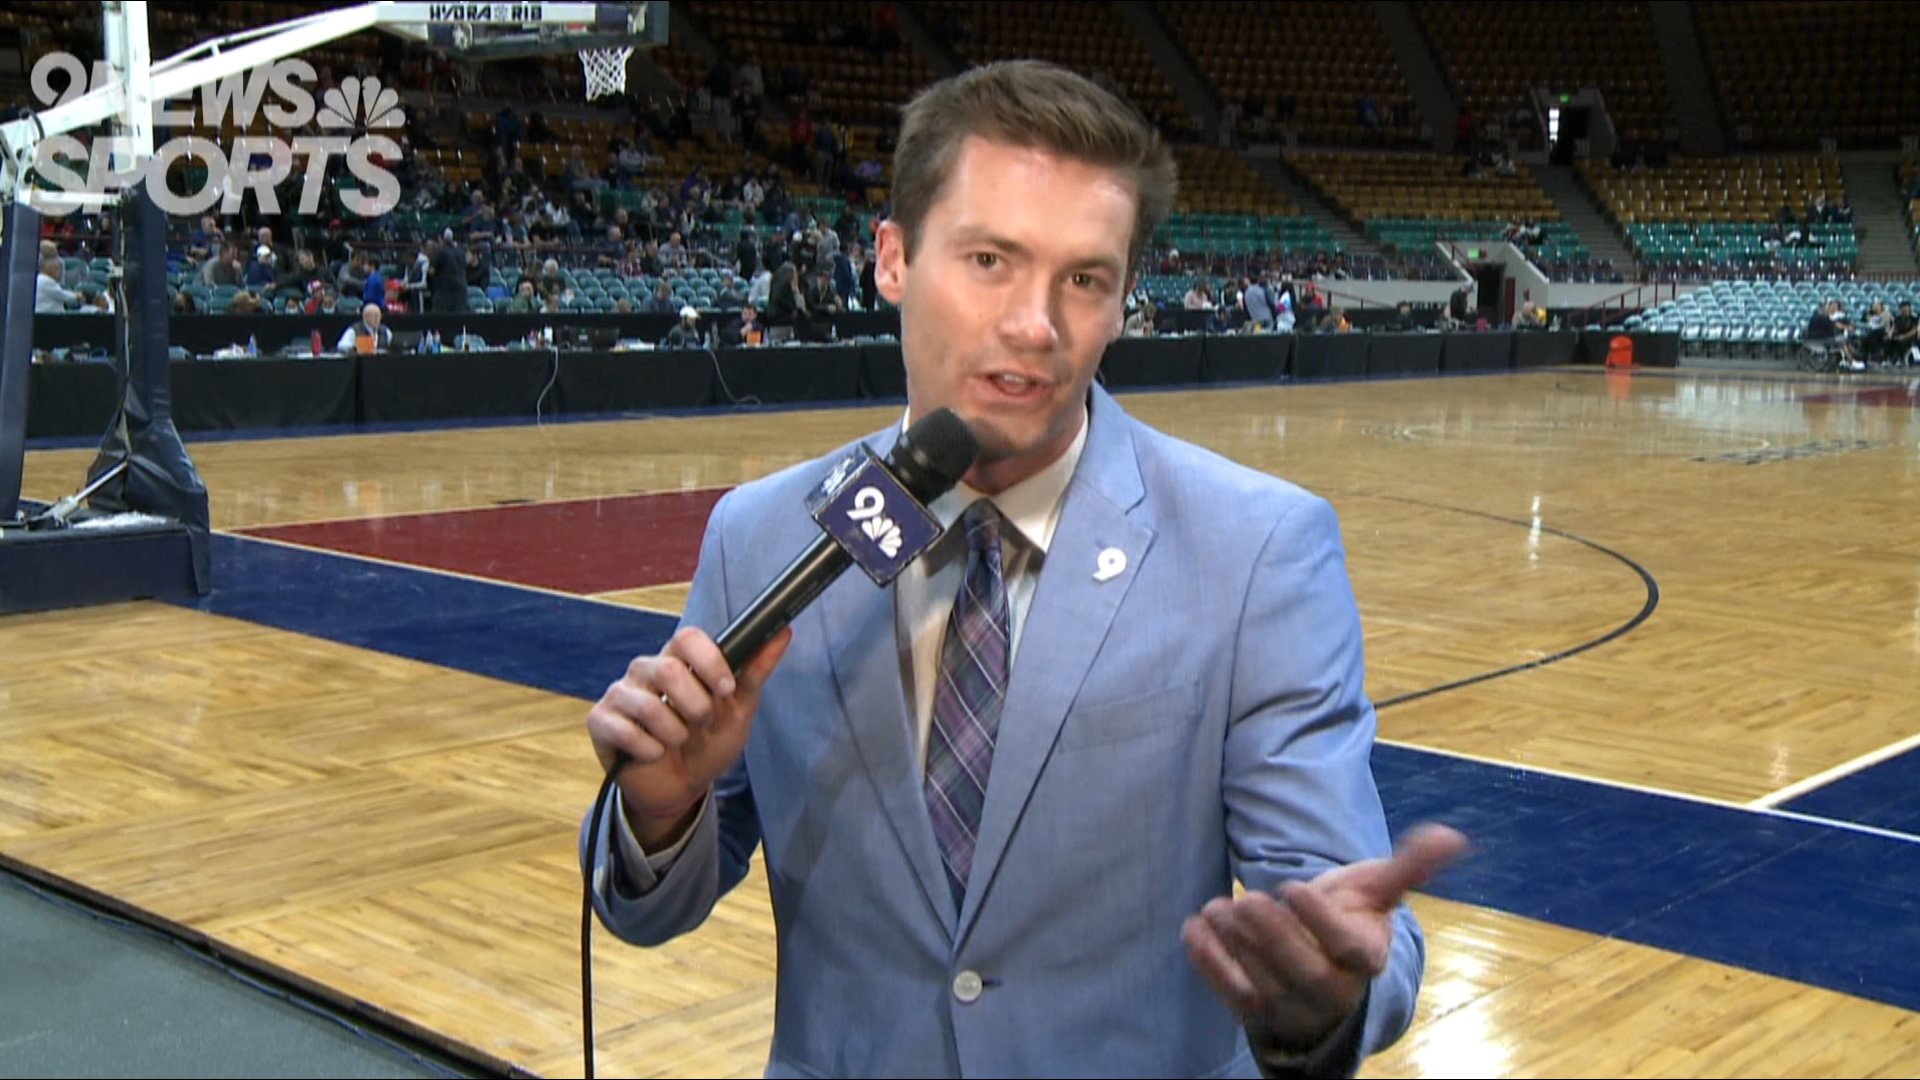 Scotty Gange reports from the Denver Coliseum in the Great Eight round of the 5A boys basketball tournament.